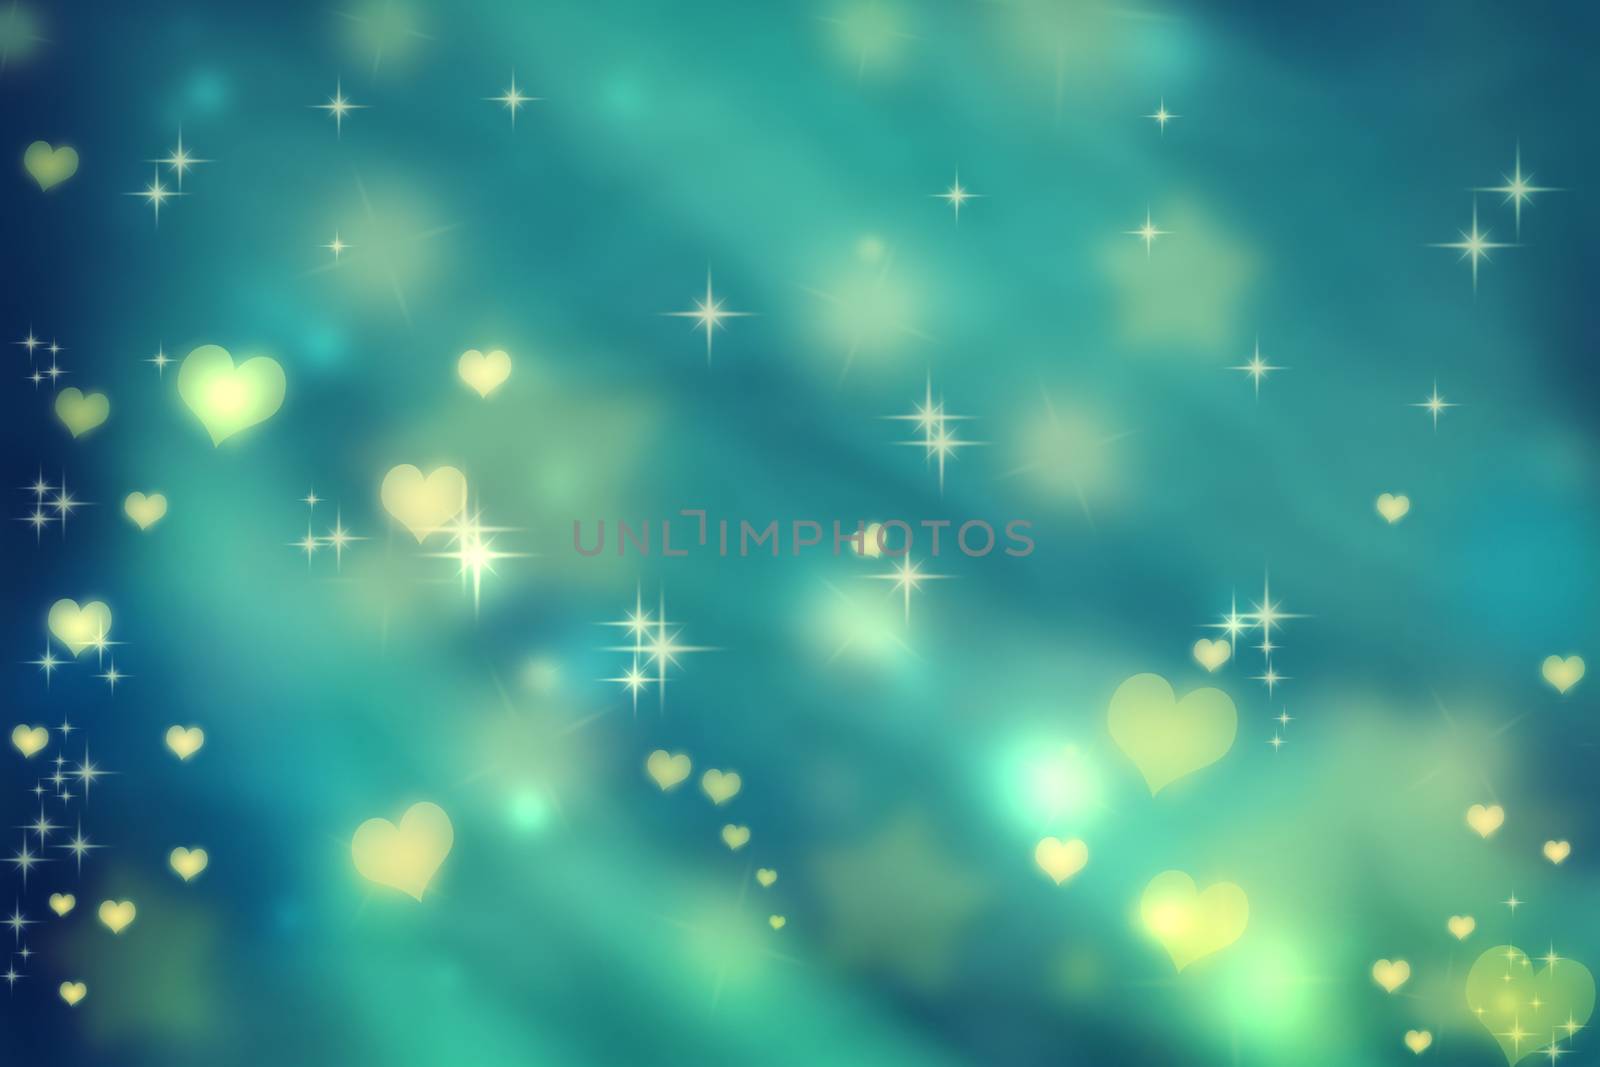 Golden small hearts on teal background with stars